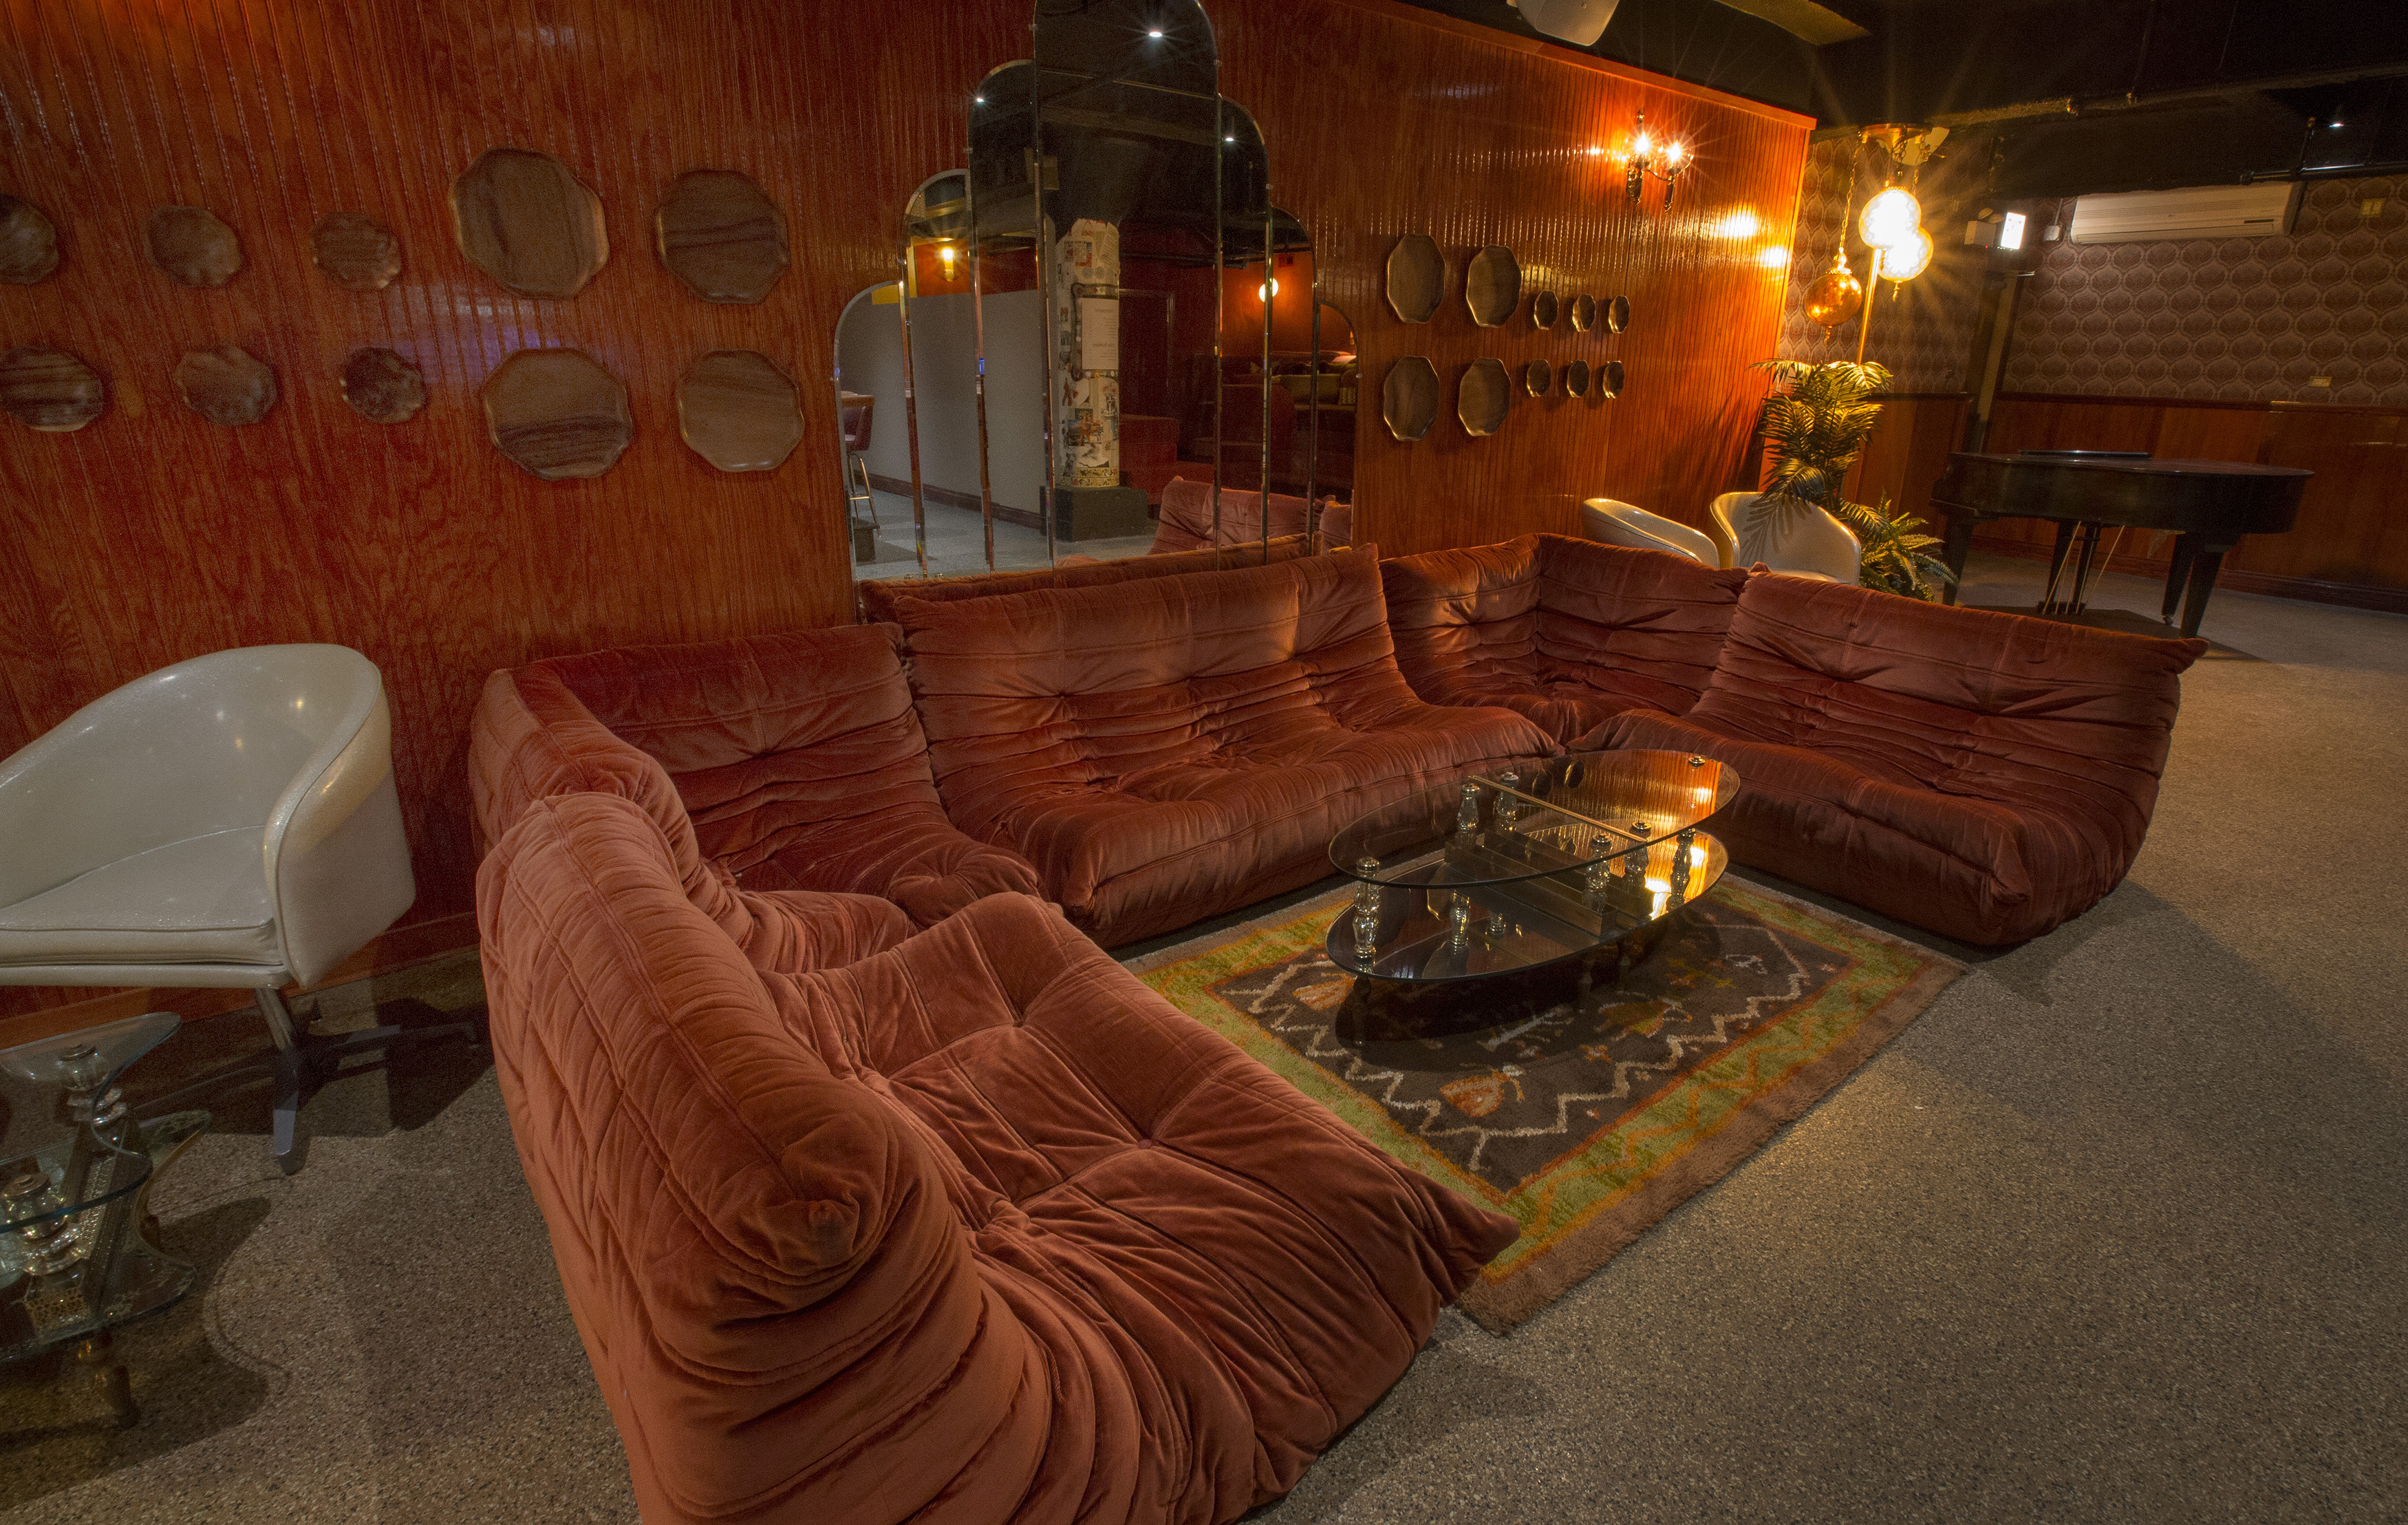 A 1970-style brown couch inside a basement bar space.